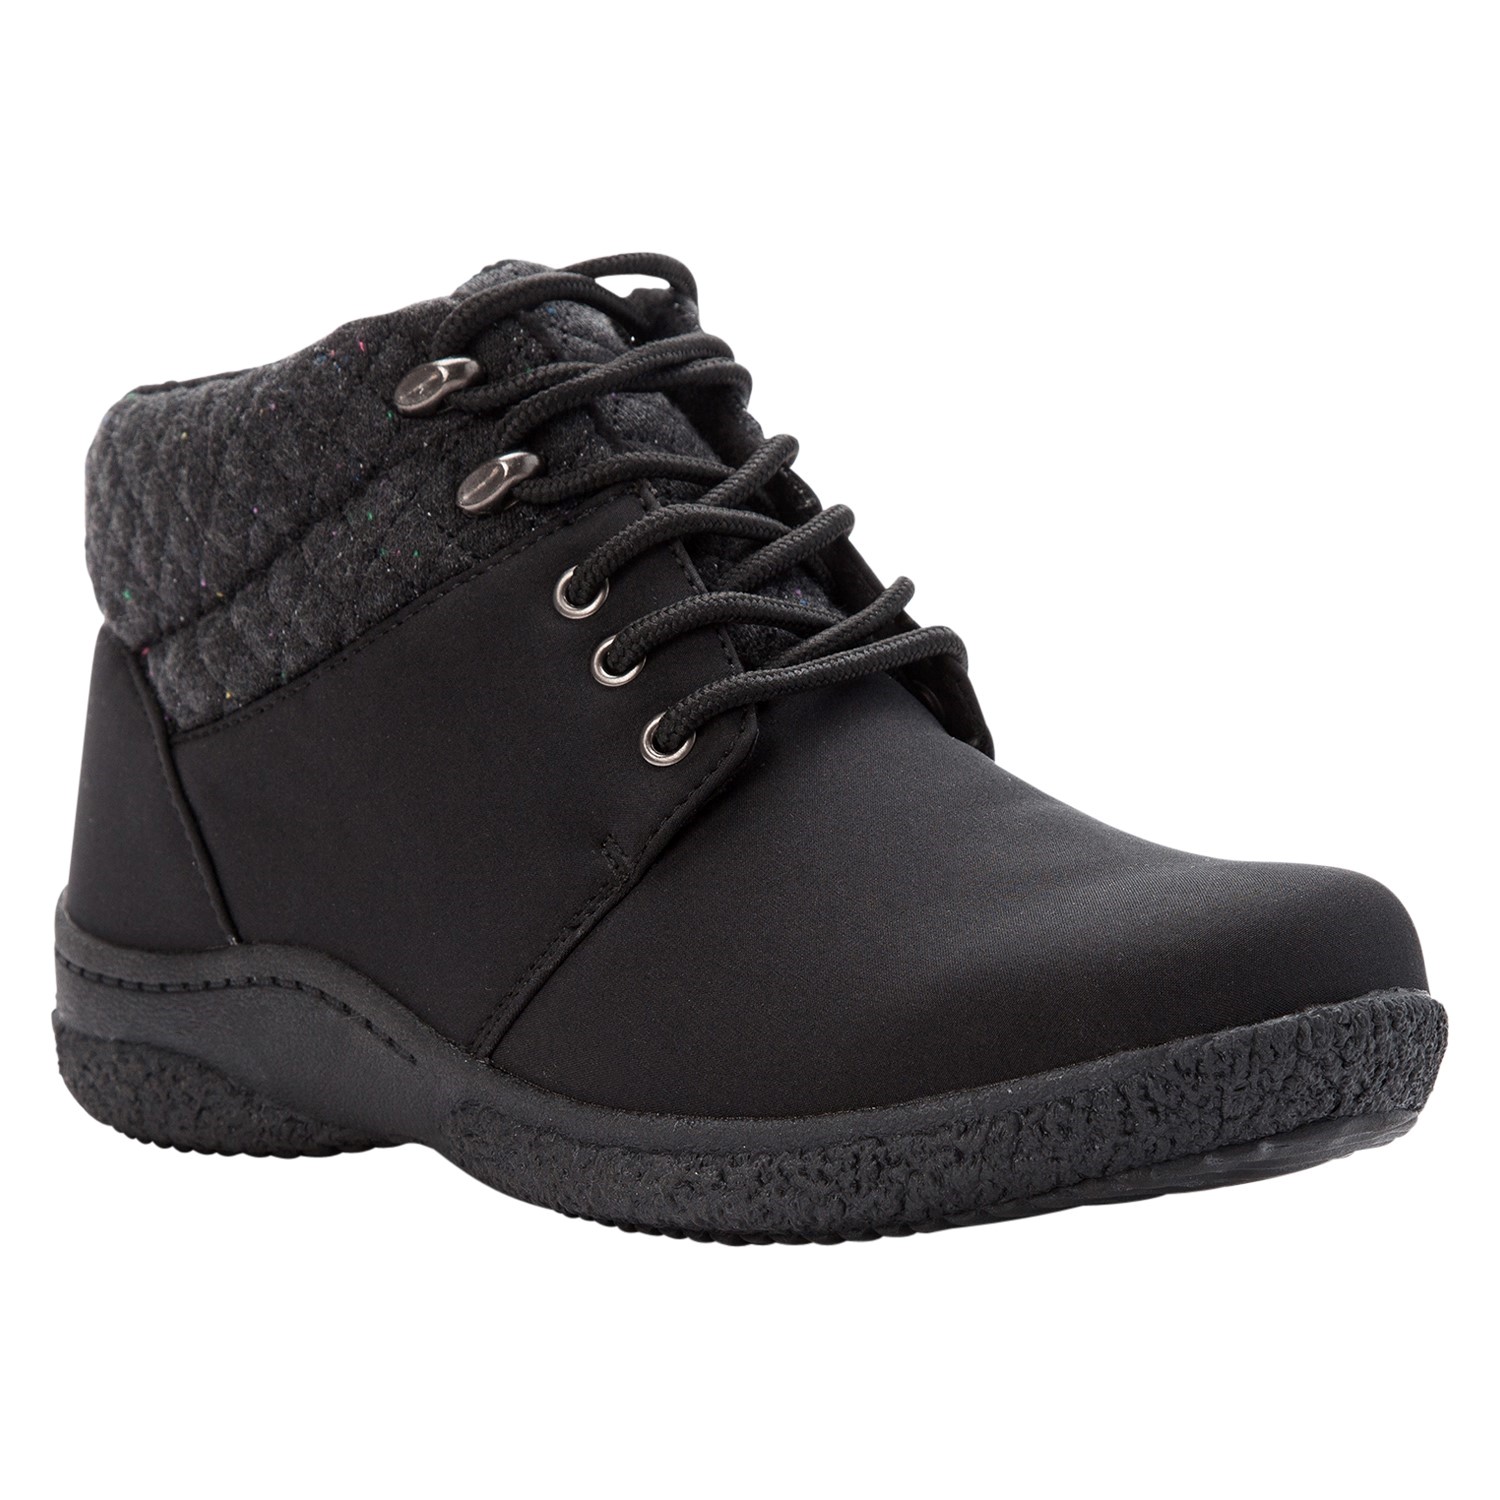 Propet Madi Ankle Lace Women's Boots 